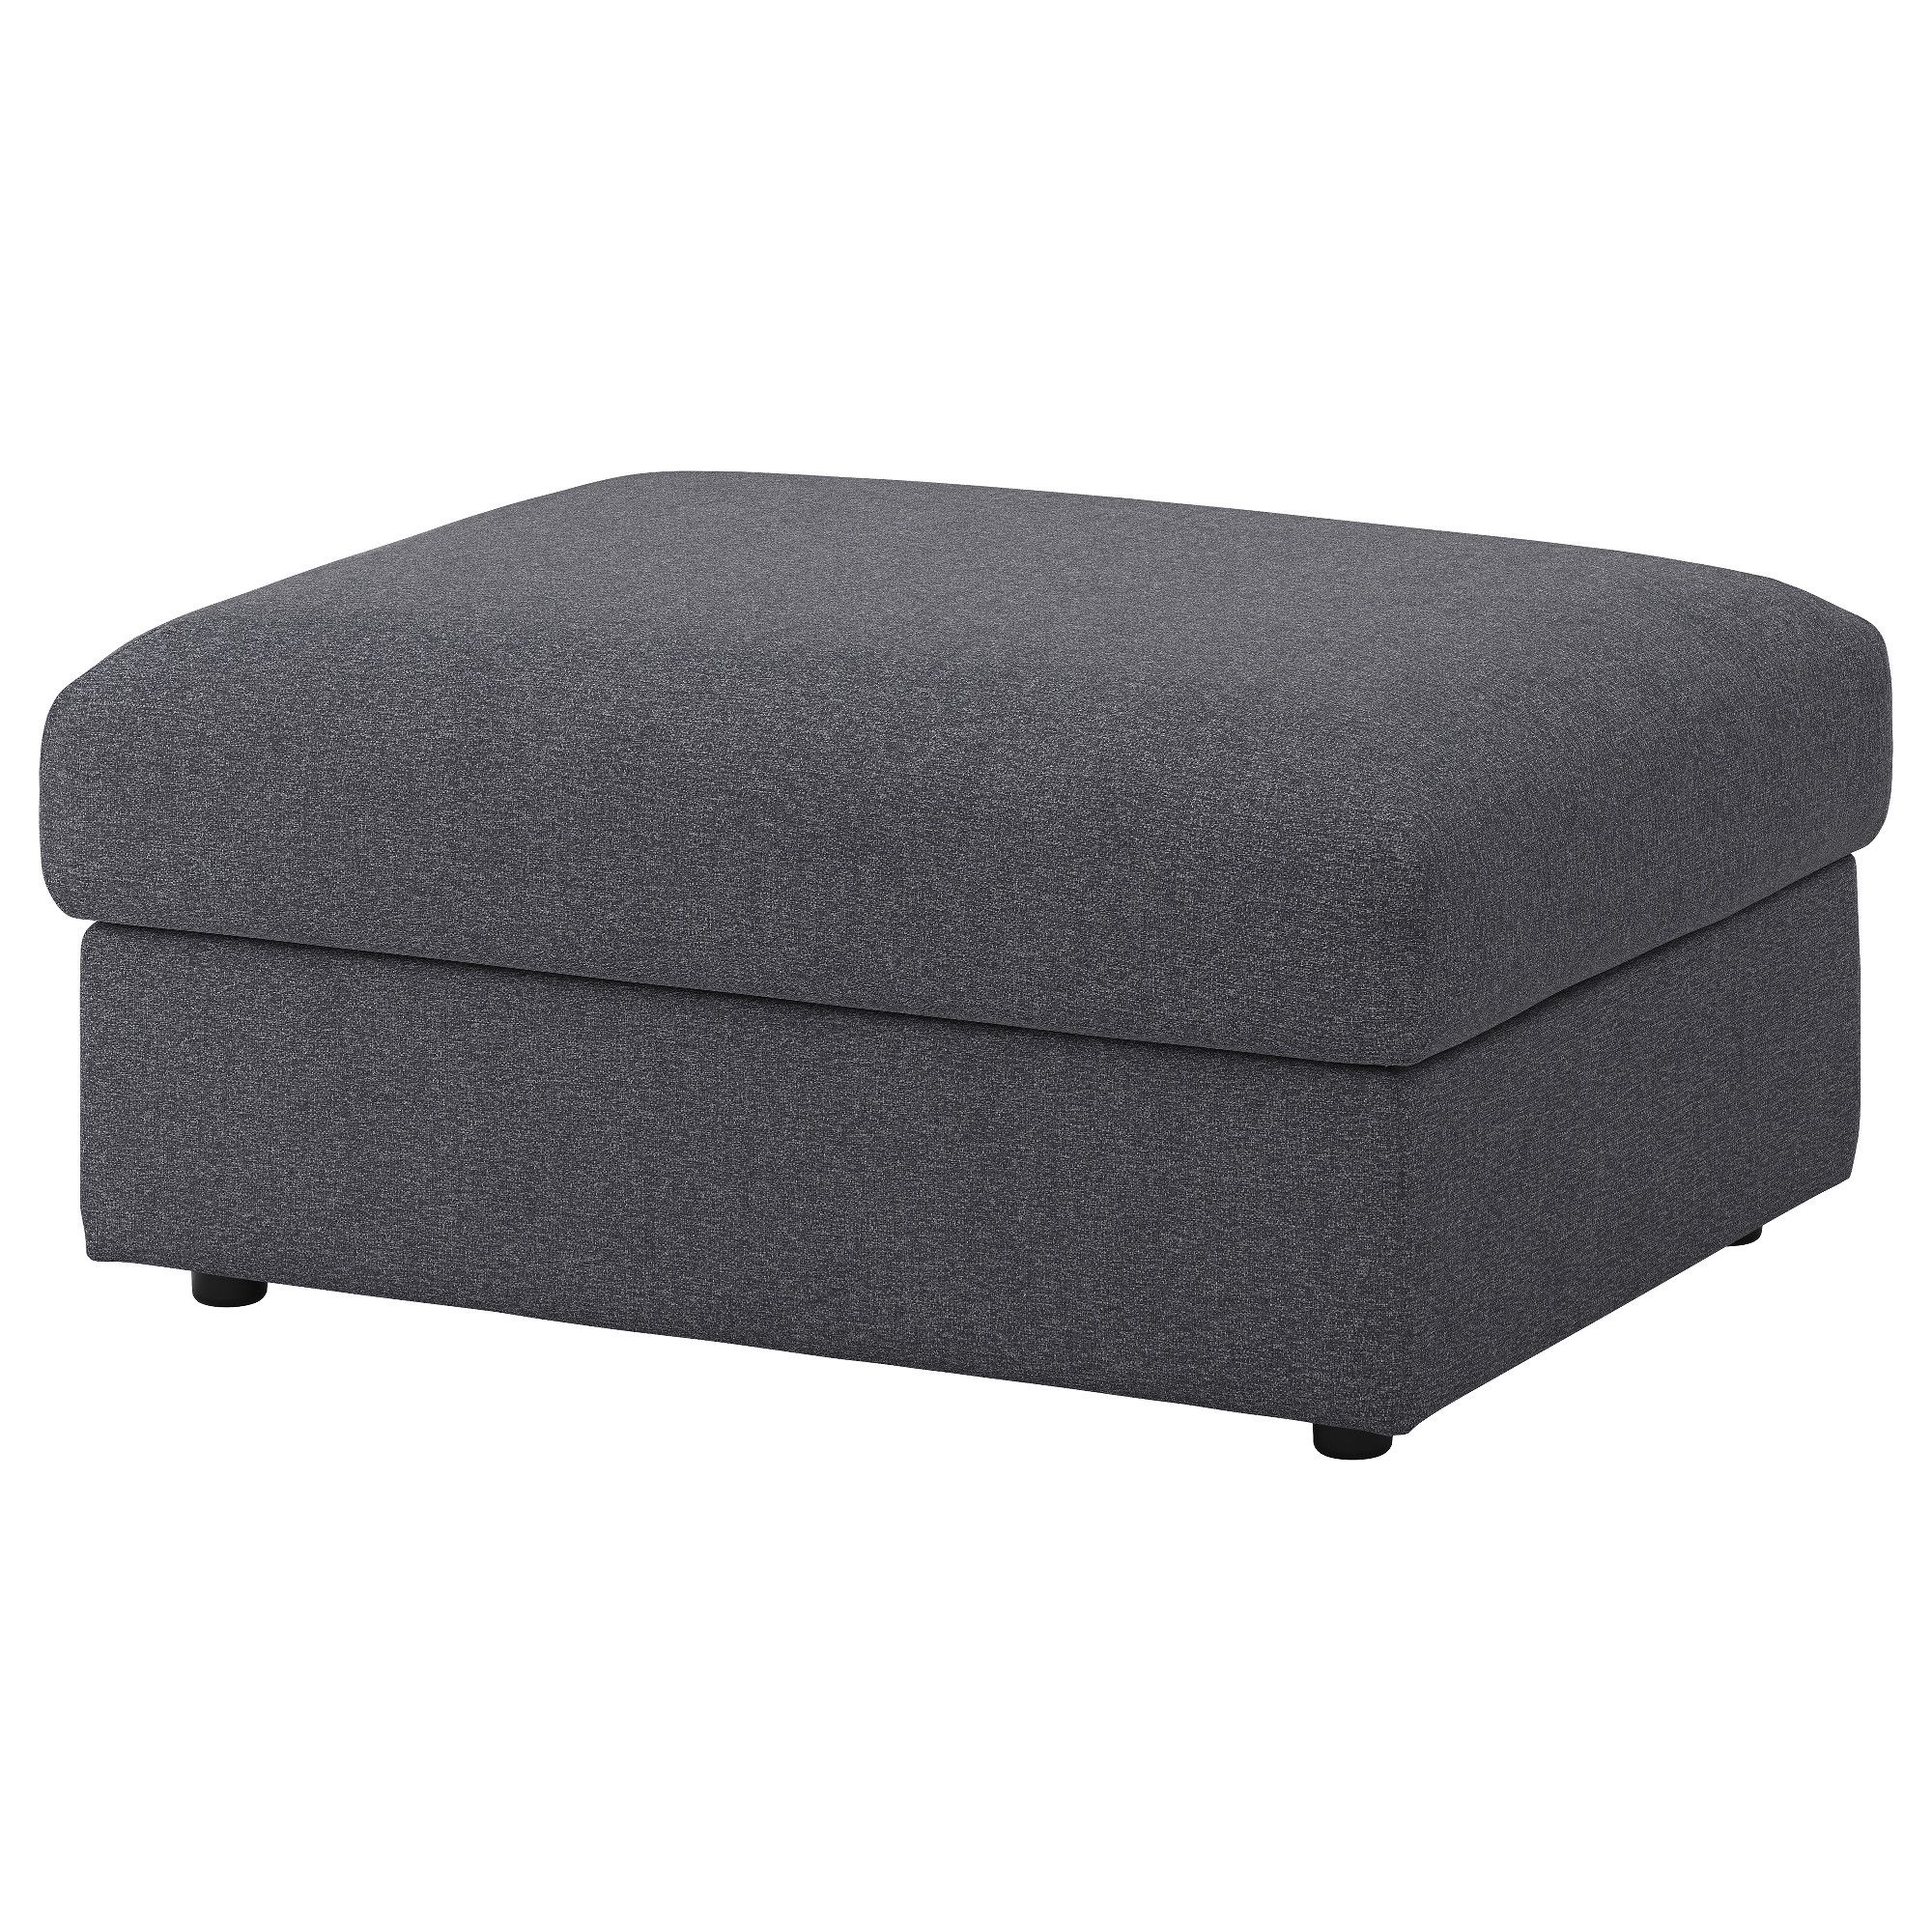 Vimle Footstool With Storage Gunnared Medium Grey Ikea With Footstools And Pouffes (View 11 of 15)